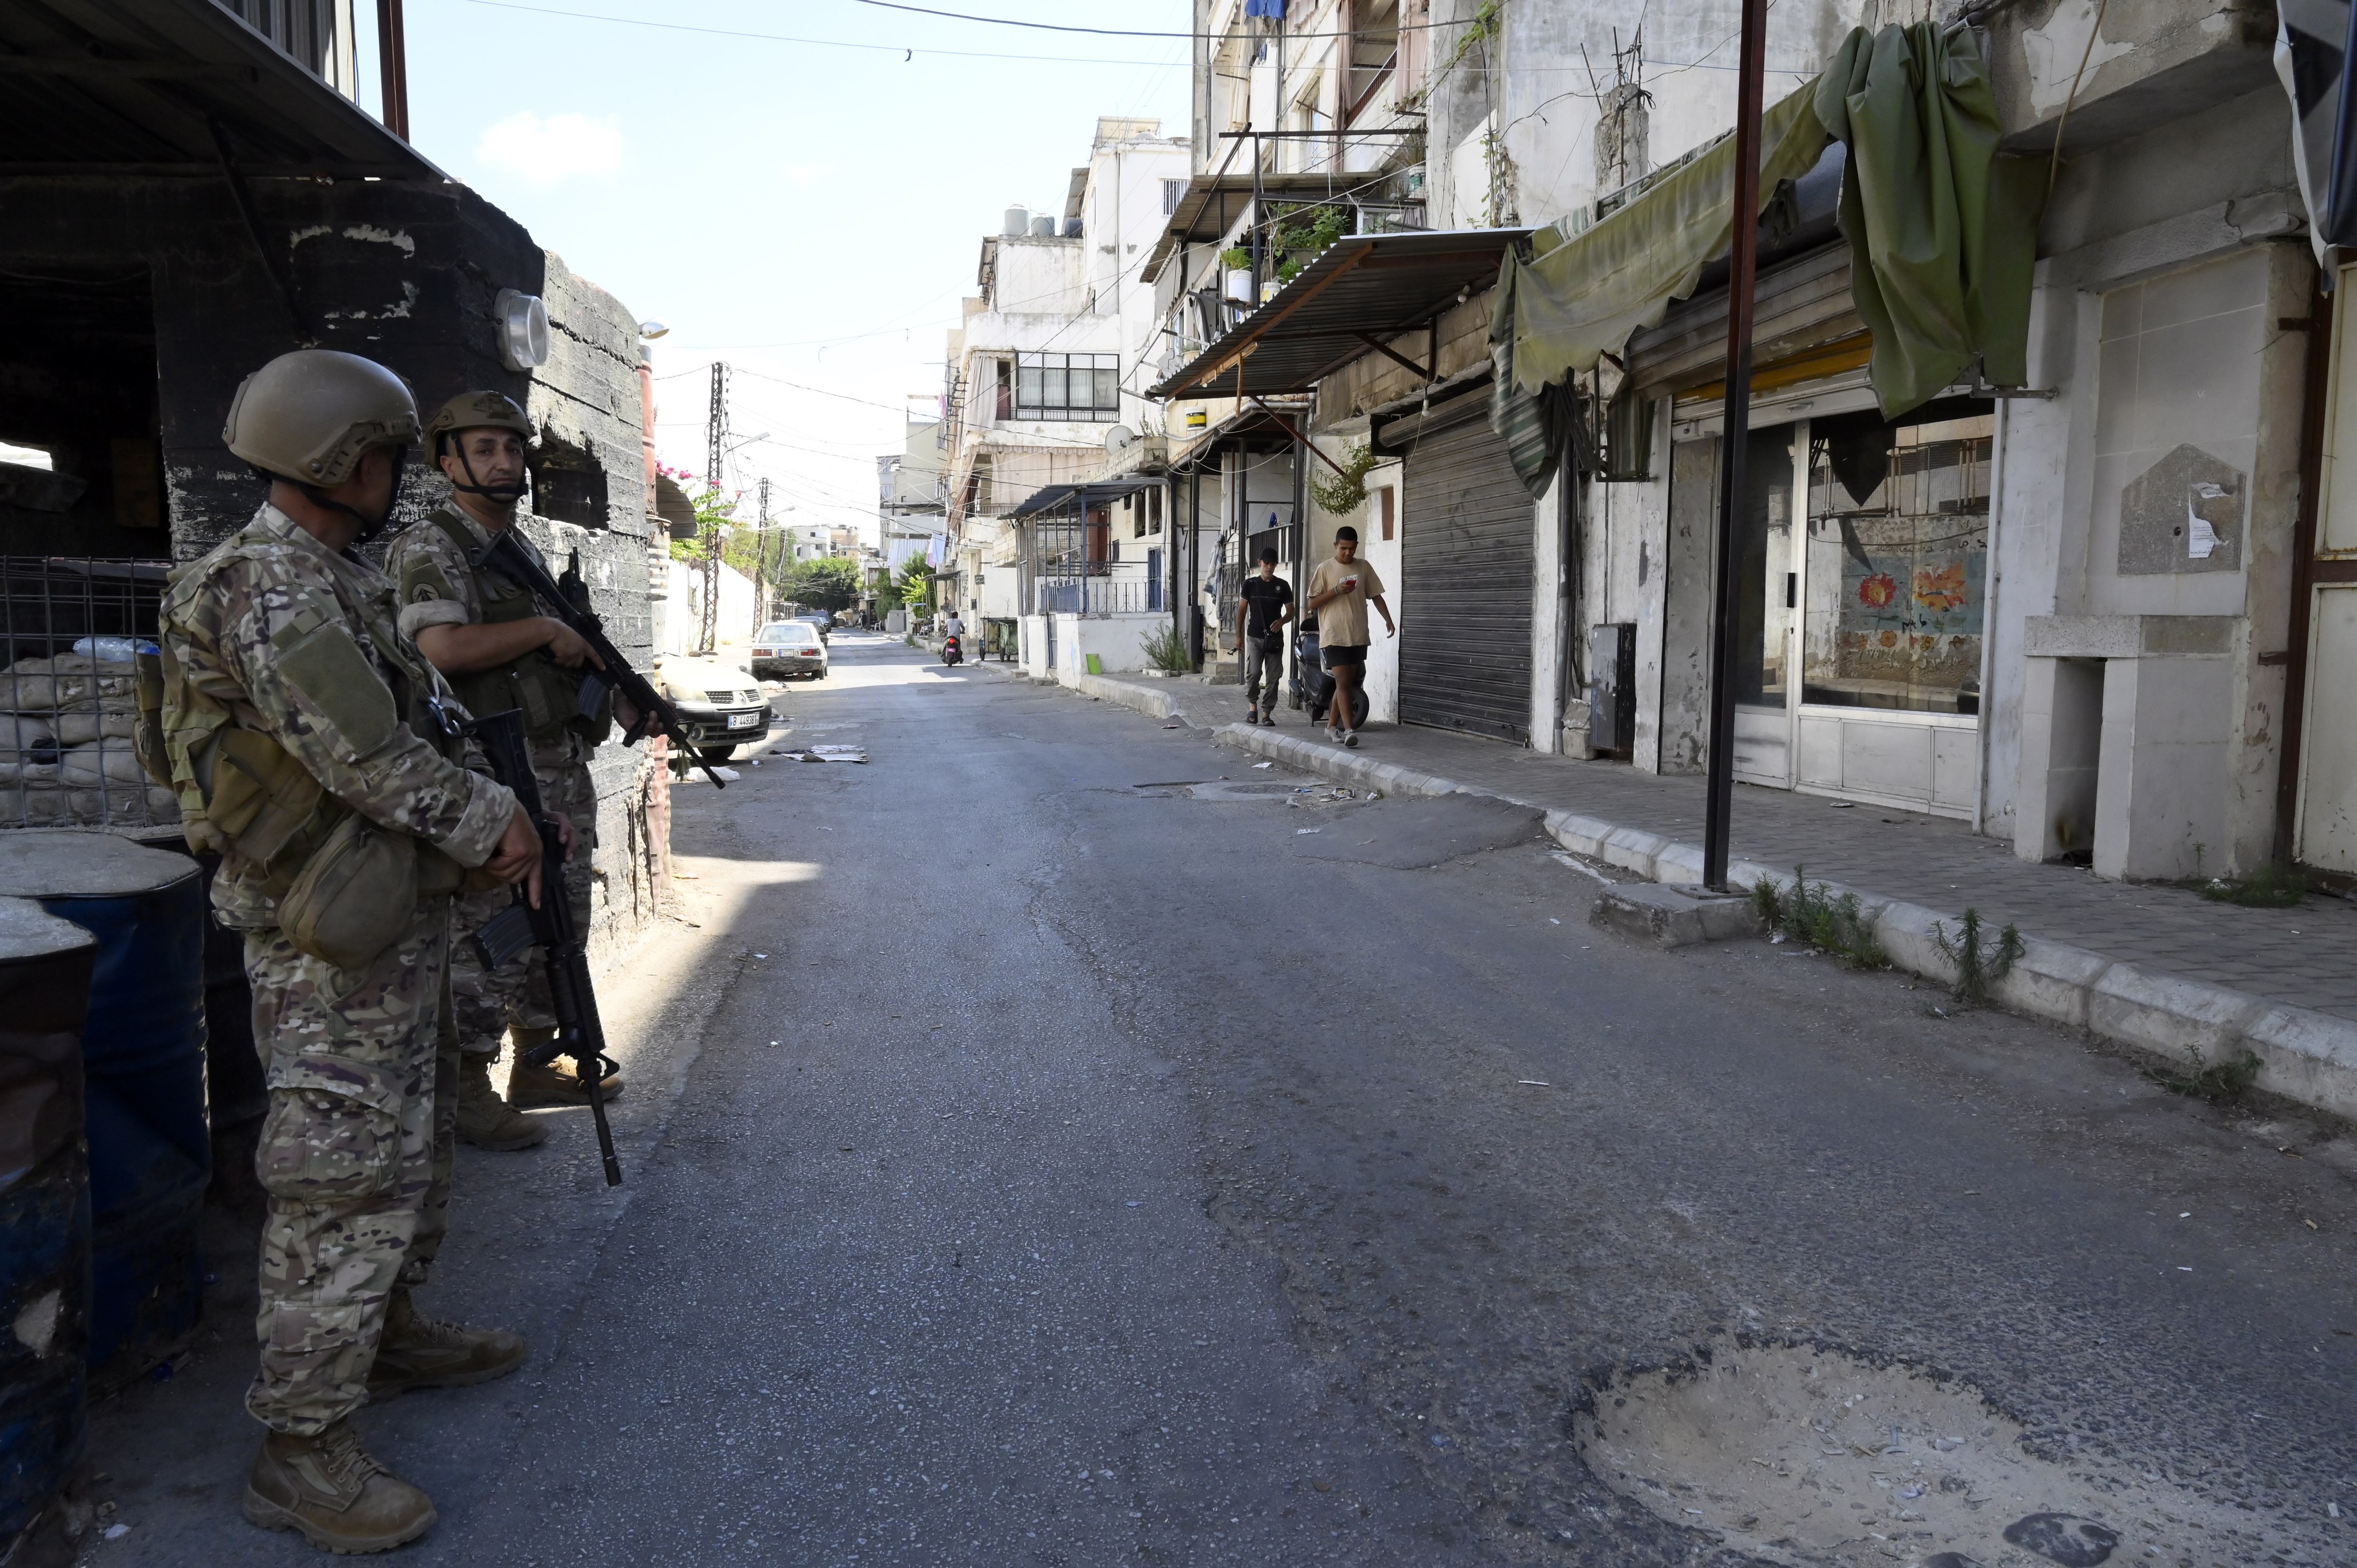 Lebanese soldiers stand guard at the entrance of Ain el-Hilweh Palestinian refugee camp during clashes between supporters of the Fatah movement and rival groups, in Sidon, Lebanon on Tuesday. Photo: EPA-EFE